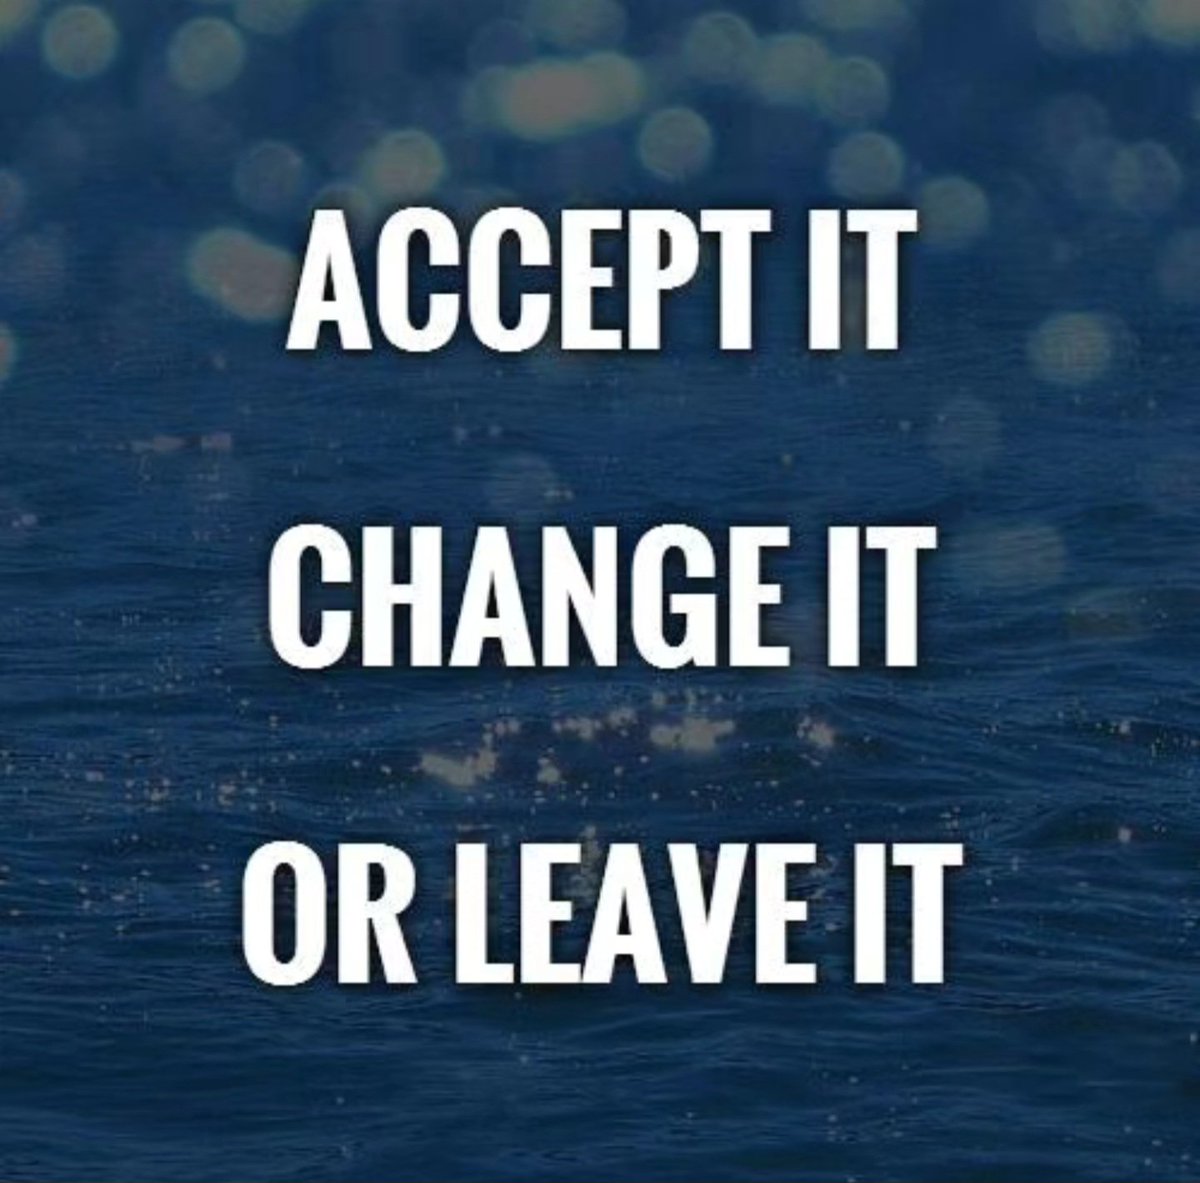 Good morning! Remember, you always have options to do the right thing. Accept, change, or leave it alone. Make the right moves. #acceptit #changeit #leaveit #helpinthehouse #Solutionist #iamaningredient #JusticeGeneral